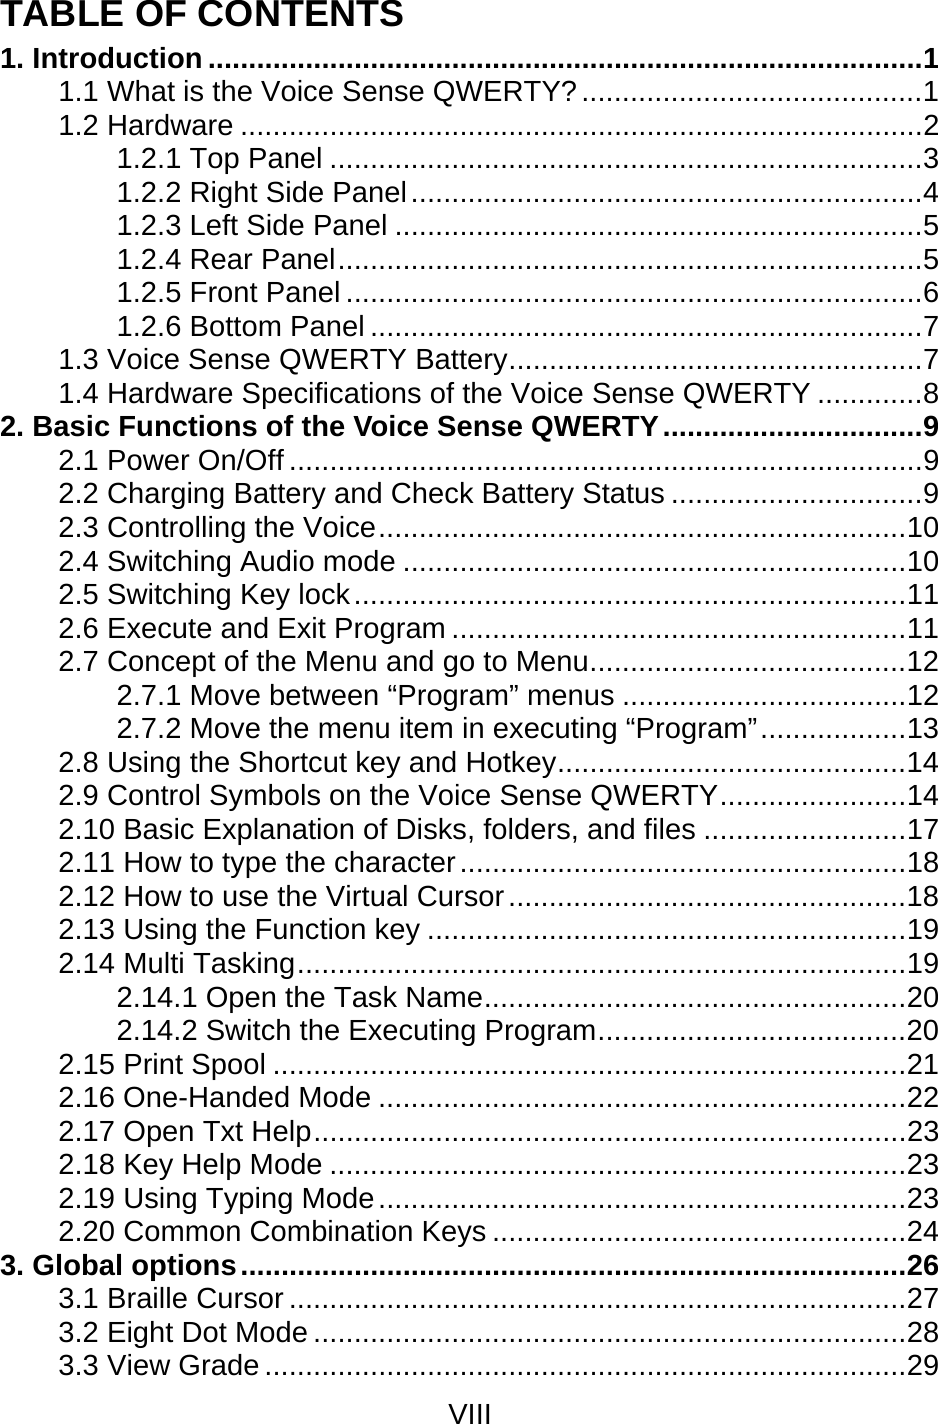 VIII  TABLE OF CONTENTS 1. Introduction ........................................................................................1 1.1 What is the Voice Sense QWERTY?..........................................1 1.2 Hardware ....................................................................................2 1.2.1 Top Panel .........................................................................3 1.2.2 Right Side Panel...............................................................4 1.2.3 Left Side Panel .................................................................5 1.2.4 Rear Panel........................................................................5 1.2.5 Front Panel .......................................................................6 1.2.6 Bottom Panel ....................................................................7 1.3 Voice Sense QWERTY Battery...................................................7 1.4 Hardware Specifications of the Voice Sense QWERTY .............8 2. Basic Functions of the Voice Sense QWERTY................................9 2.1 Power On/Off ..............................................................................9 2.2 Charging Battery and Check Battery Status ...............................9 2.3 Controlling the Voice.................................................................10 2.4 Switching Audio mode ..............................................................10 2.5 Switching Key lock....................................................................11 2.6 Execute and Exit Program ........................................................11 2.7 Concept of the Menu and go to Menu.......................................12 2.7.1 Move between “Program” menus ...................................12 2.7.2 Move the menu item in executing “Program”..................13 2.8 Using the Shortcut key and Hotkey...........................................14 2.9 Control Symbols on the Voice Sense QWERTY.......................14 2.10 Basic Explanation of Disks, folders, and files .........................17 2.11 How to type the character.......................................................18 2.12 How to use the Virtual Cursor.................................................18 2.13 Using the Function key ...........................................................19 2.14 Multi Tasking...........................................................................19 2.14.1 Open the Task Name....................................................20 2.14.2 Switch the Executing Program......................................20 2.15 Print Spool ..............................................................................21 2.16 One-Handed Mode .................................................................22 2.17 Open Txt Help.........................................................................23 2.18 Key Help Mode .......................................................................23 2.19 Using Typing Mode.................................................................23 2.20 Common Combination Keys ...................................................24 3. Global options..................................................................................26 3.1 Braille Cursor ............................................................................27 3.2 Eight Dot Mode .........................................................................28 3.3 View Grade ...............................................................................29 